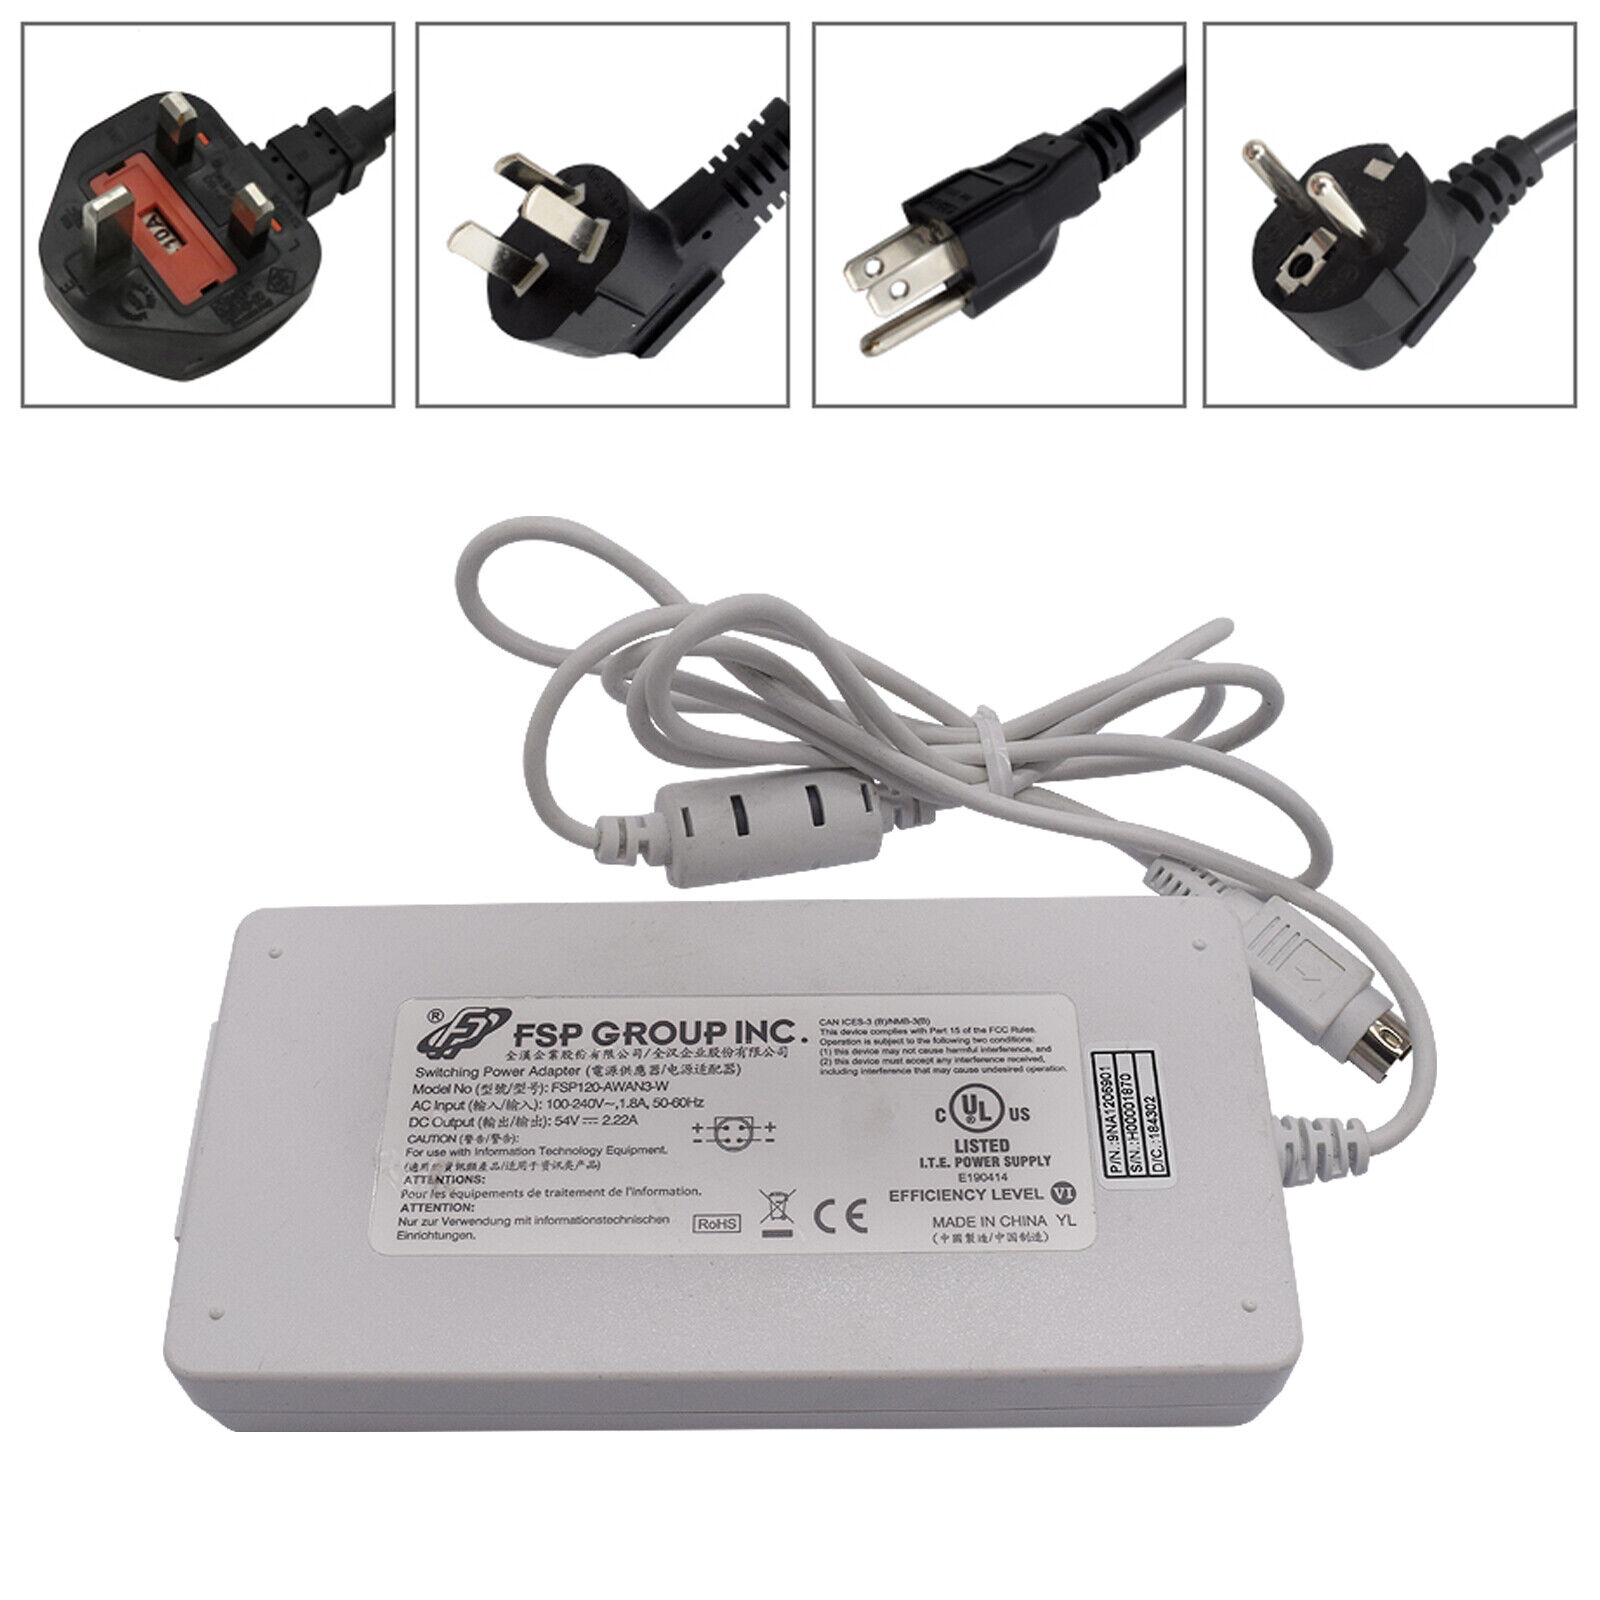 Genuine FSP FSP120-AWAN3-W 54V 2.22A120W AC Adapyer Power Supply Charger 4Pin Model: FSP120-AWAN3-W Modified Item: N - Click Image to Close